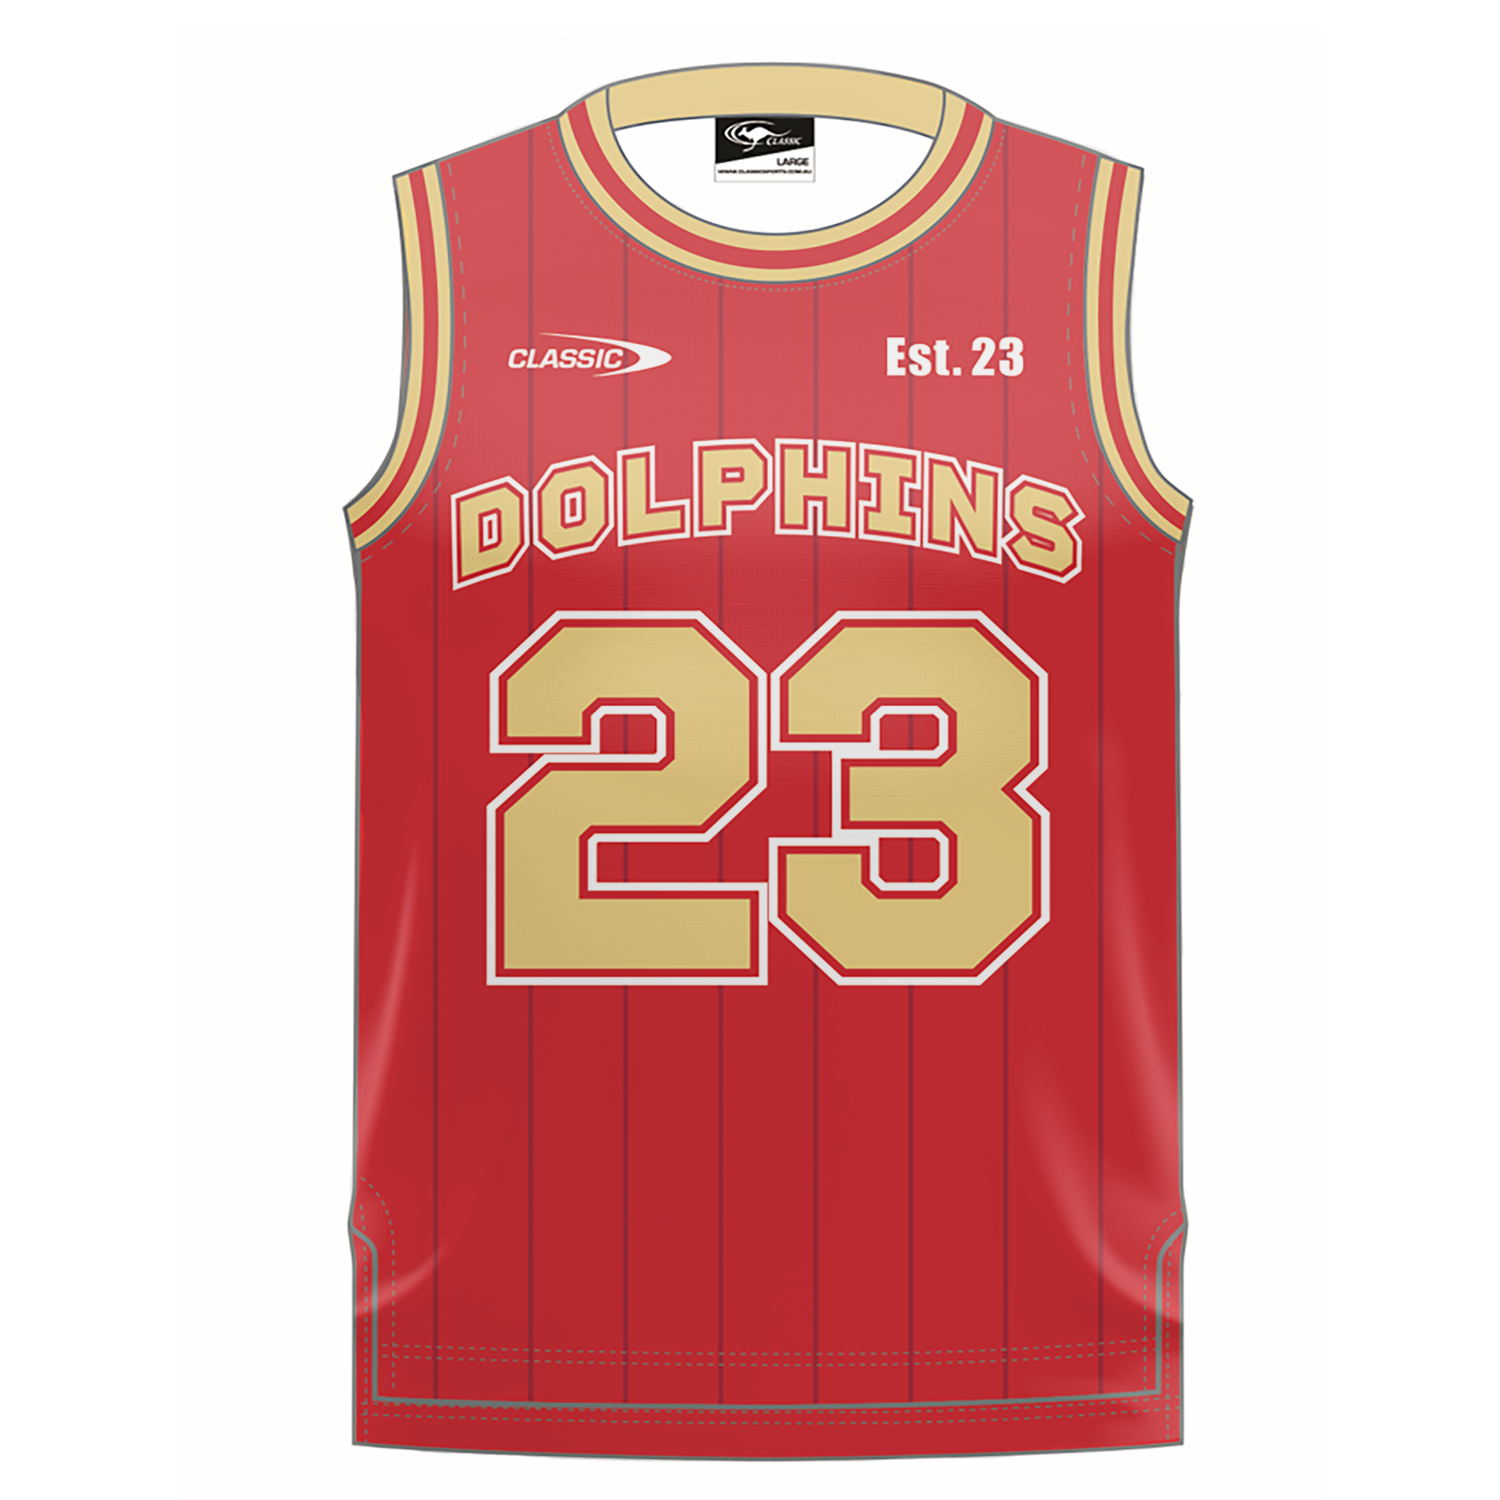 2024 DOLPHINS YOUTH BASKETBALL SINGLET RED